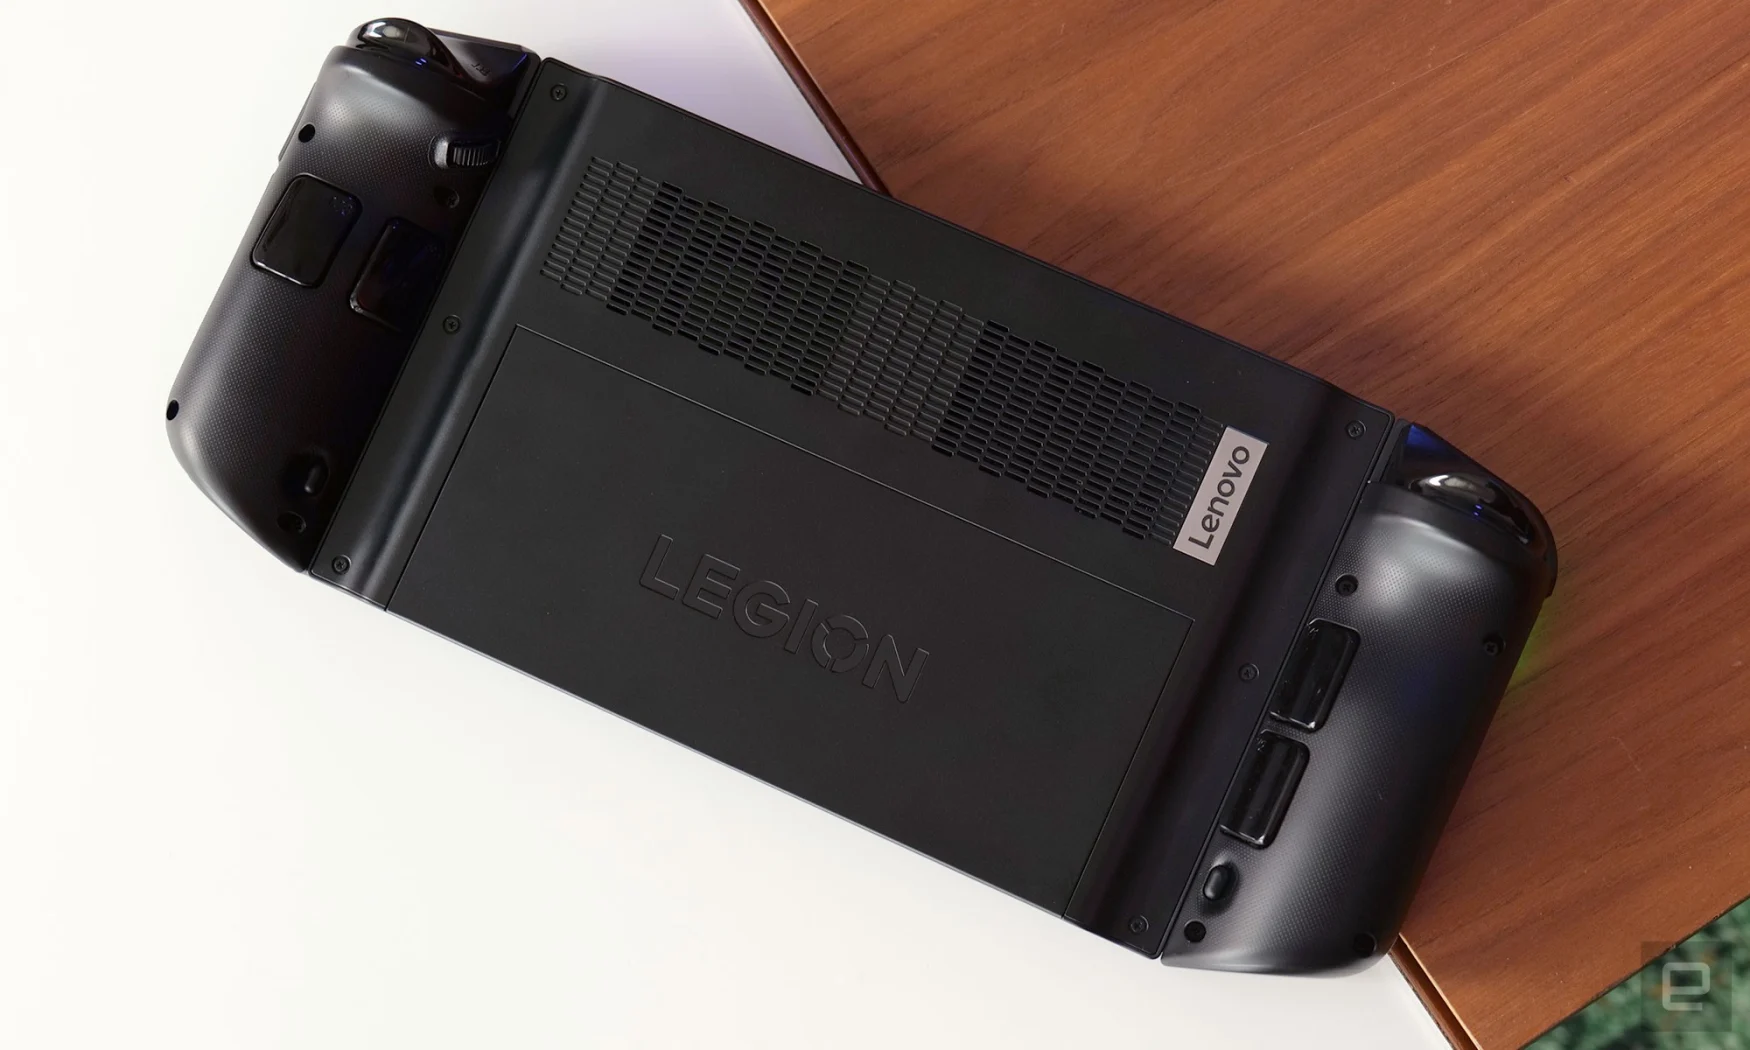 The Legion Go features an Xbox-style button layout in front along with a total of four paddles in back.